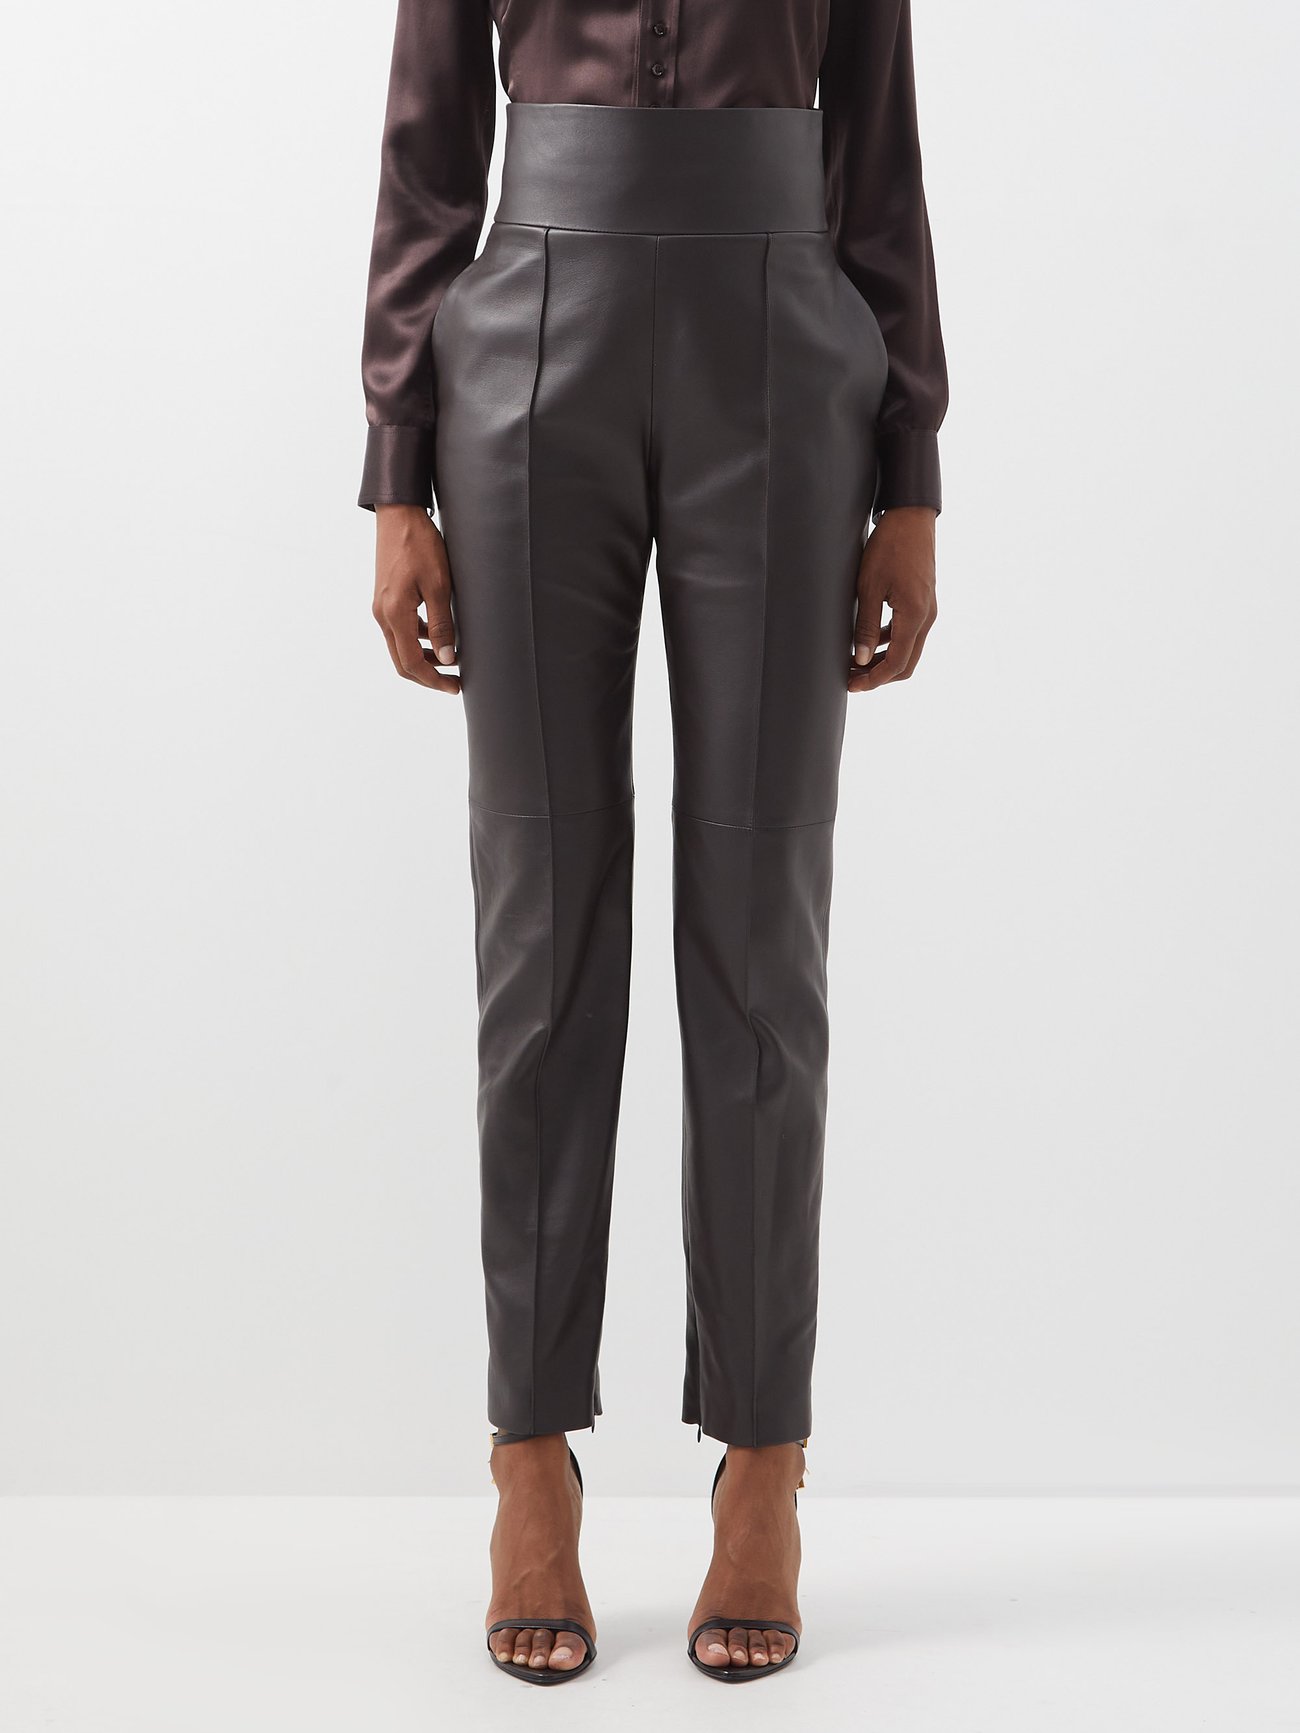 High-rise slim leather pants in brown - Alexandre Vauthier